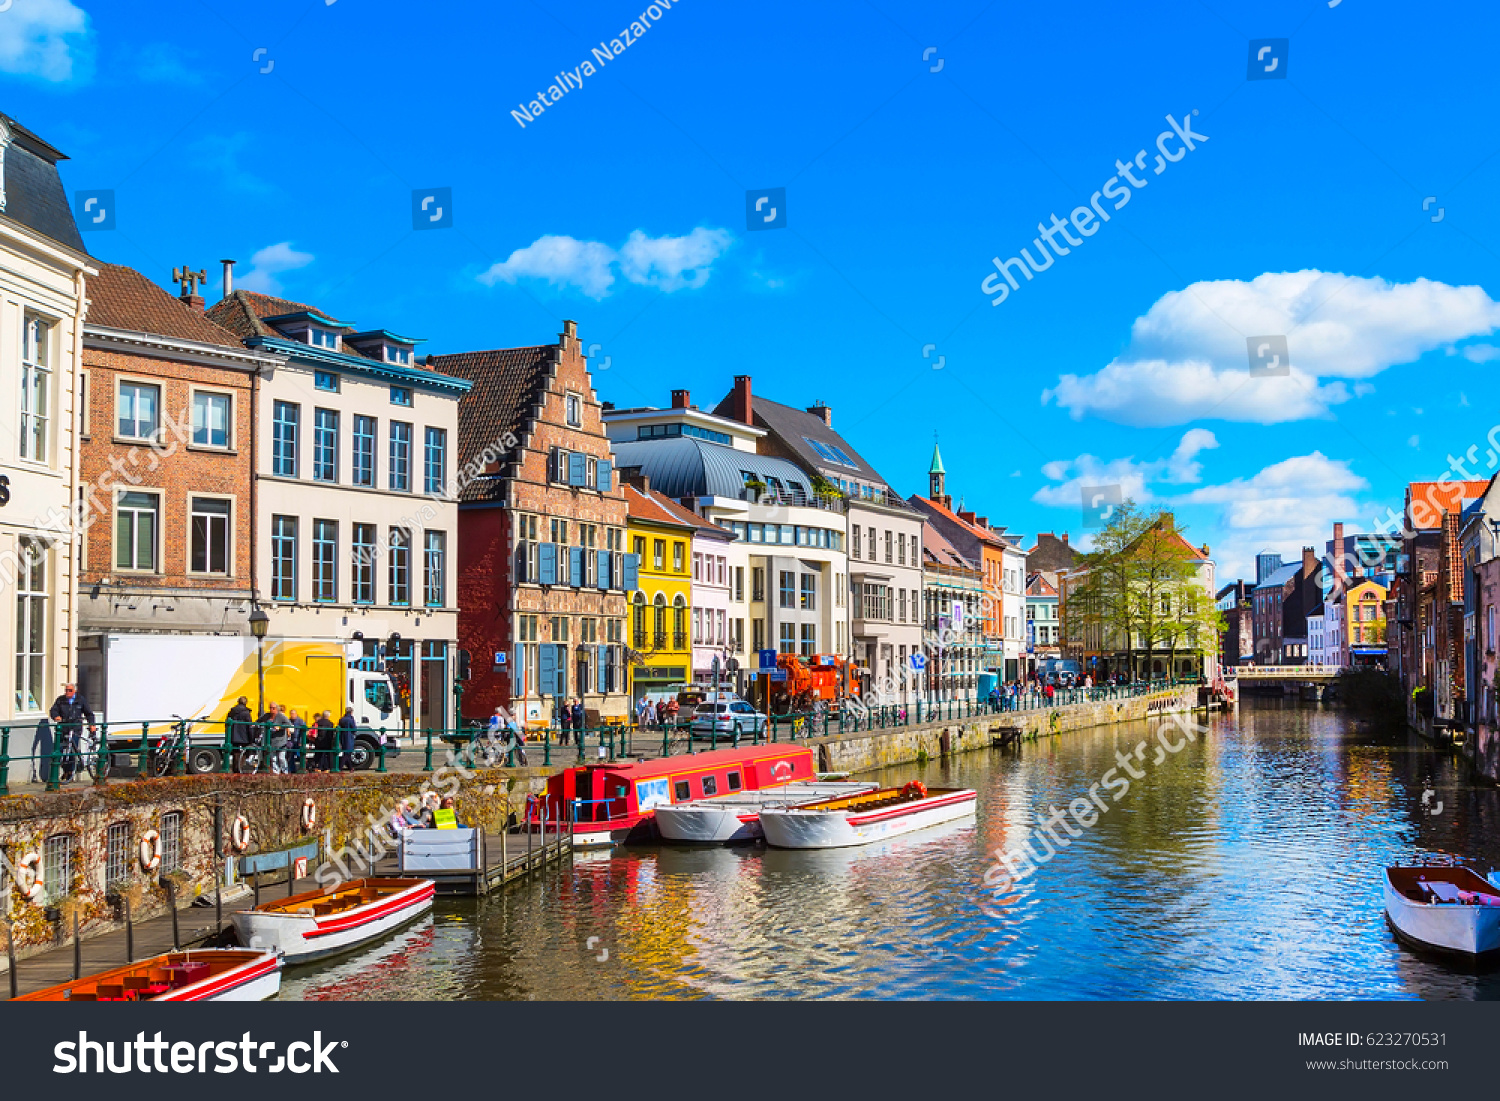 old colorful traditional houses along the canal and boats in popular touristic destination Ghent, Belgium #623270531